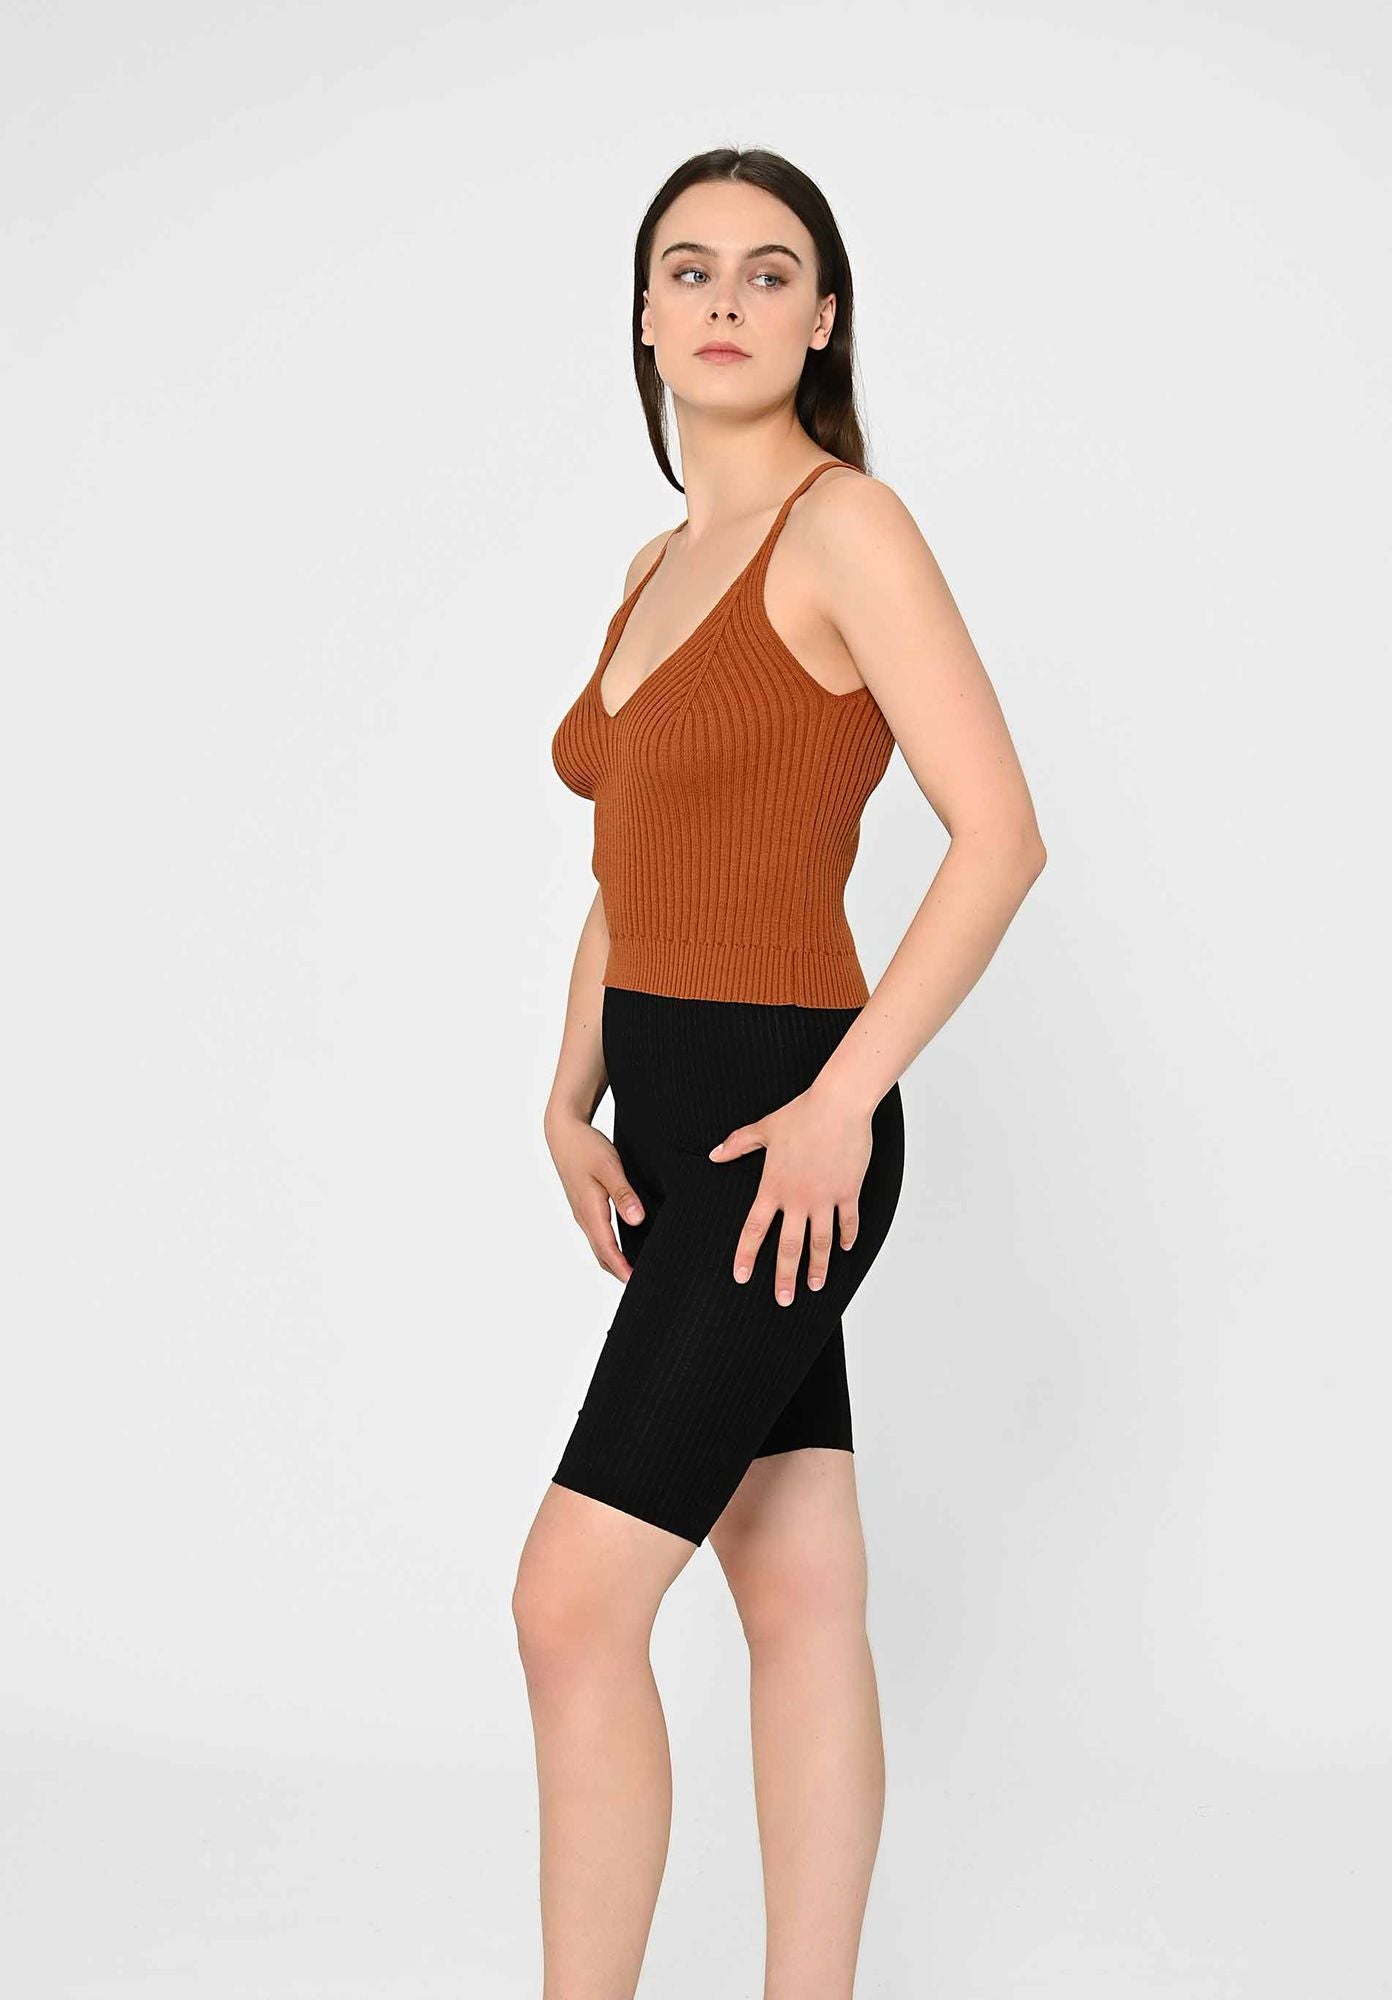 Top GAGAT in dark amber by LOVJOI made from organic cotton